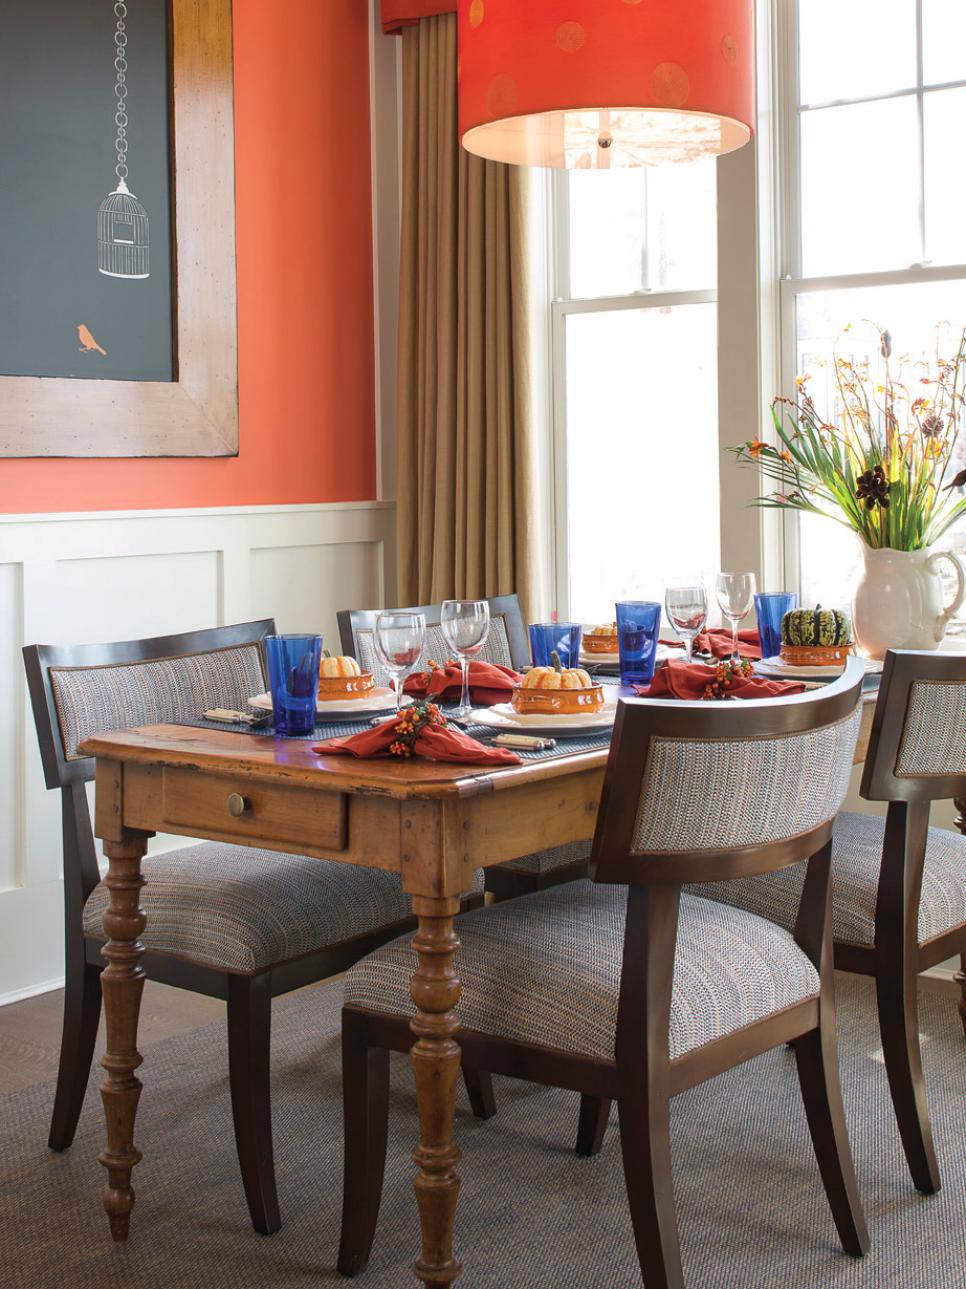 Traditional Dining Room With Burnt Orange Walls and Light Fixture